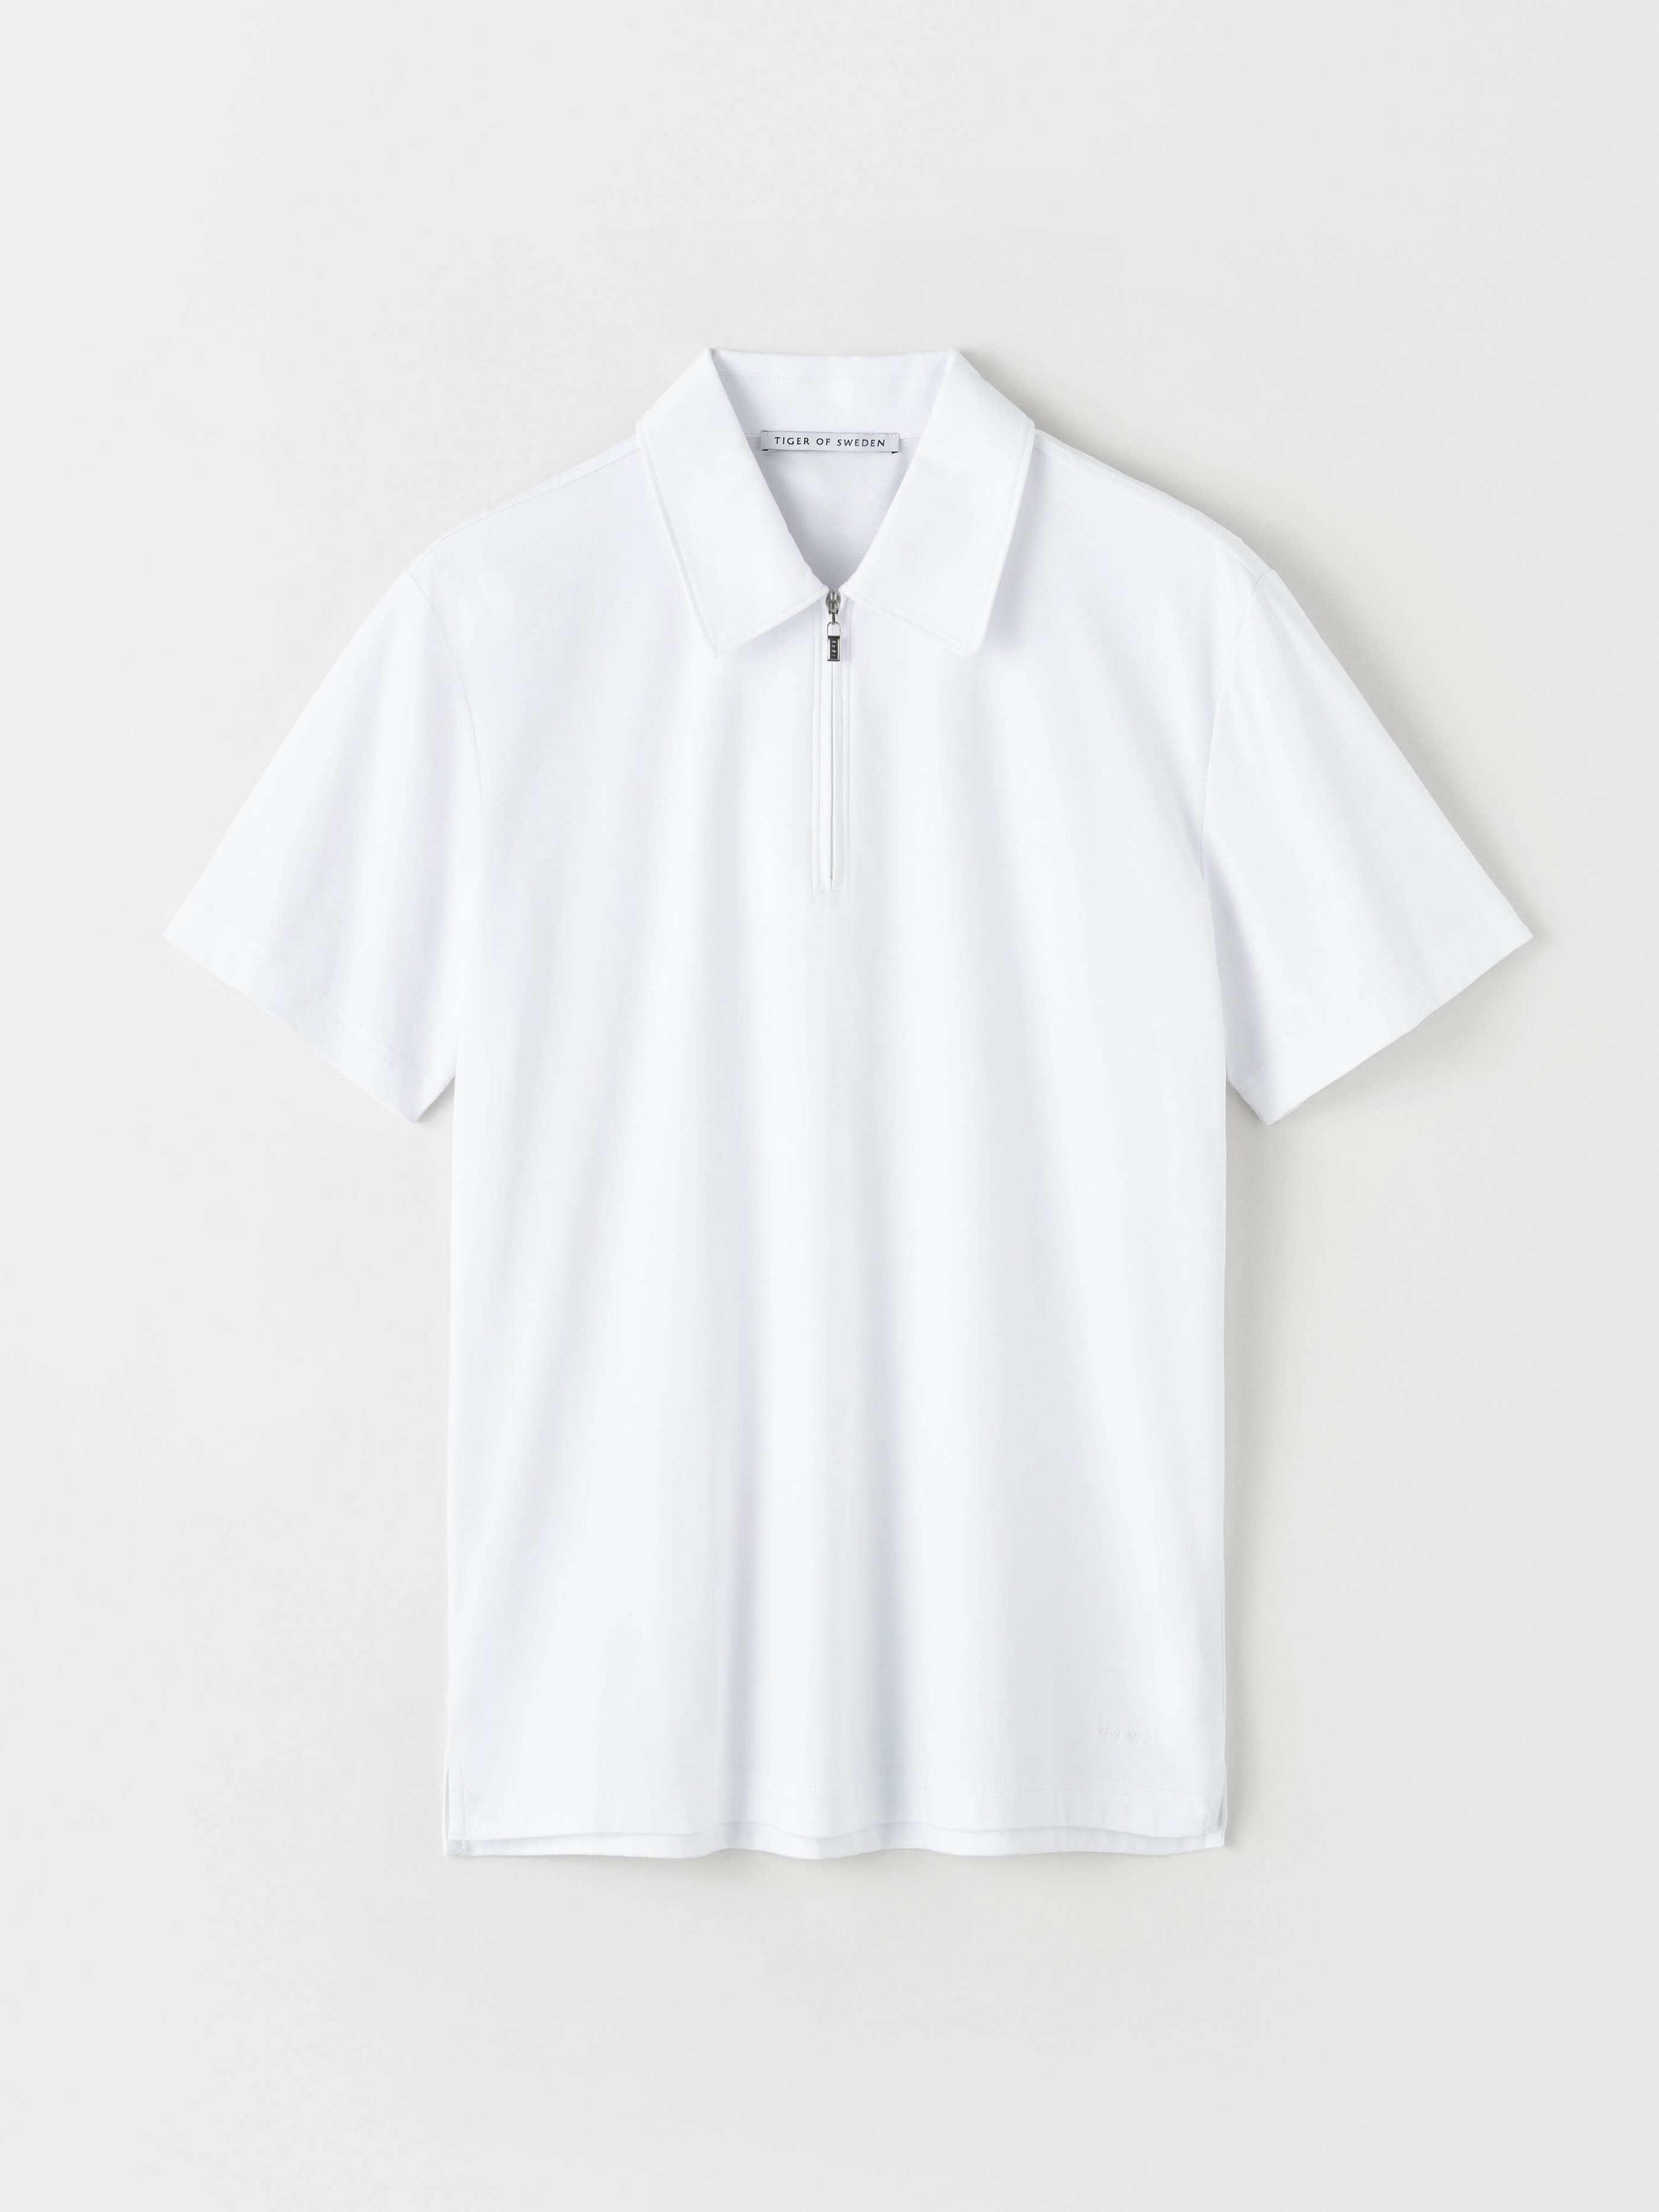 TIGER OF SWEDEN Laron Shirt in White T68882022 090-PURE WHITE FROM EIGHTYWINGOLD - OFFICIAL BRAND PARTNER